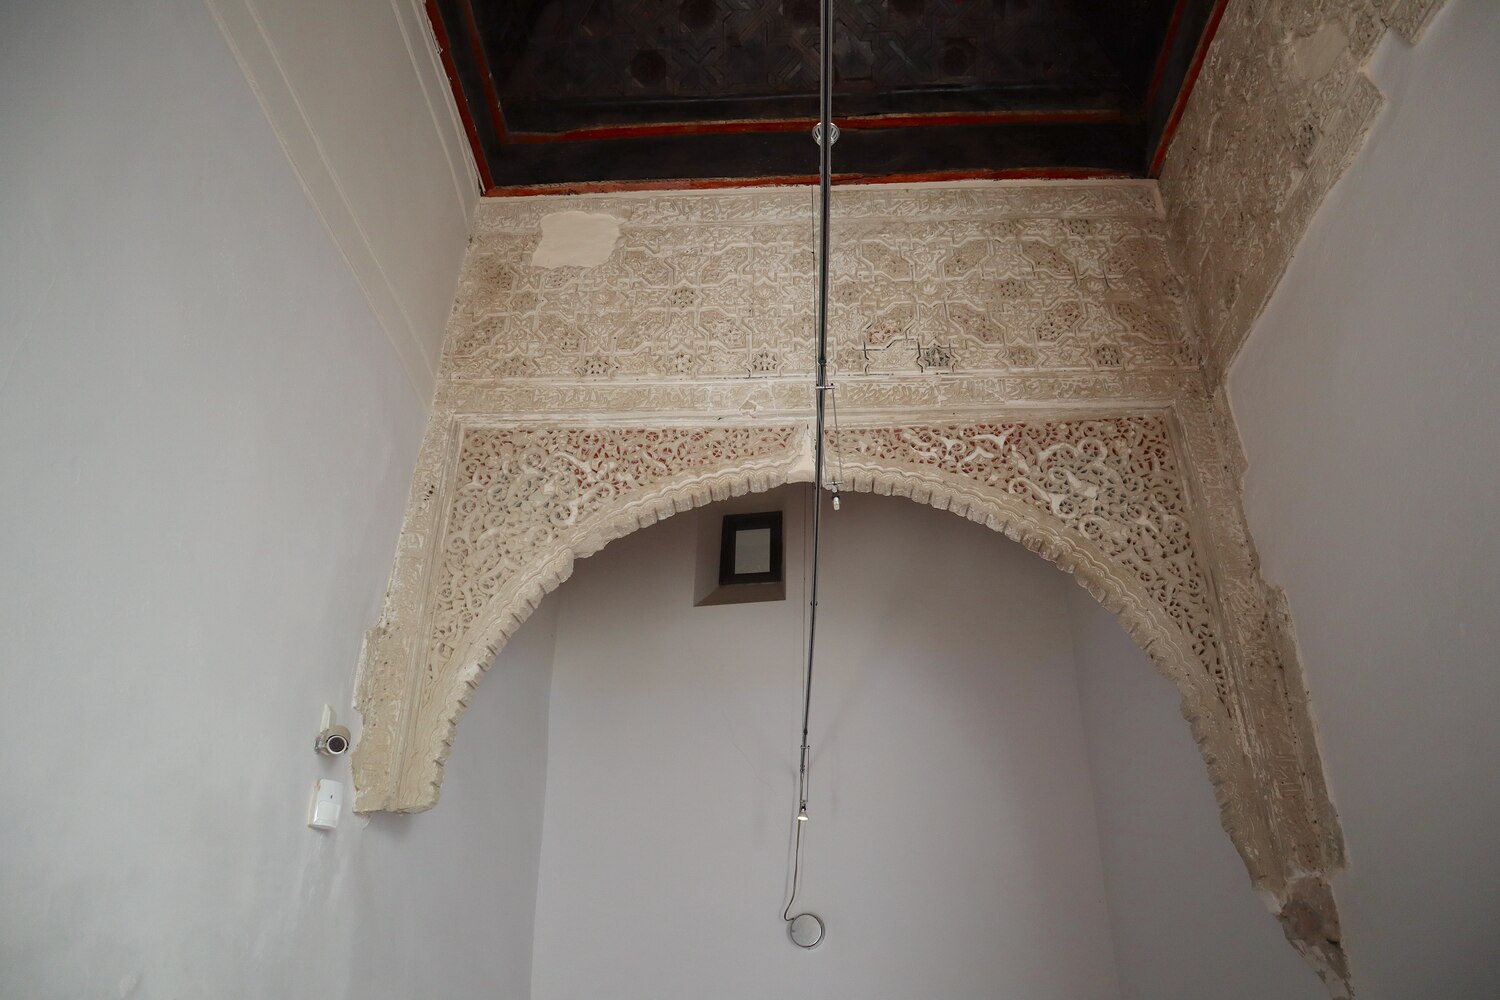 Arabic tiles inside the house - Similar to those at the Puerta del Peinador at the Alhambra